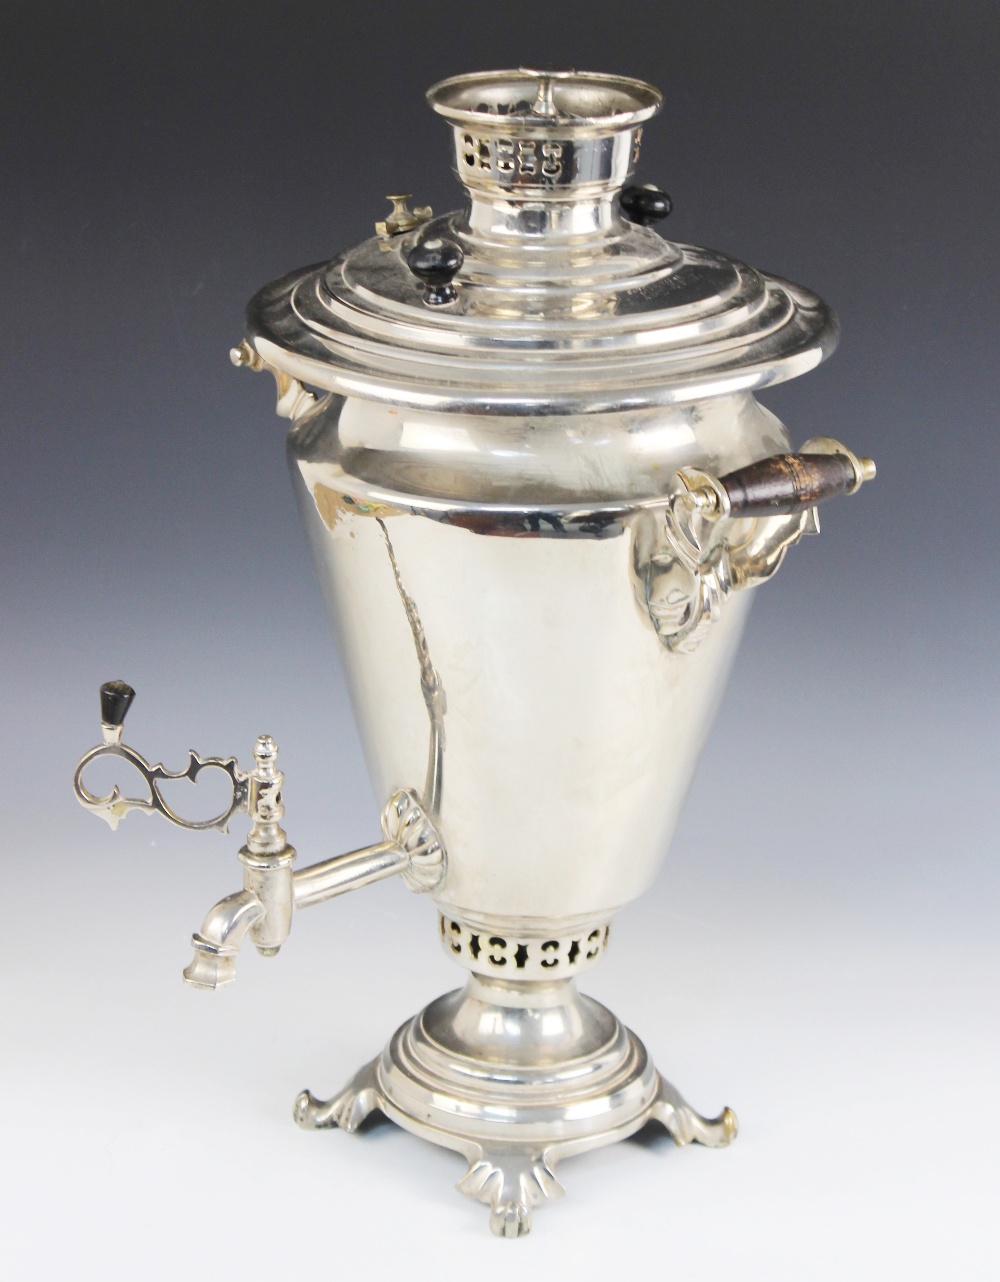 A large Russian silver plated samovar, early 20th century, of typical form with Cyrillic script to